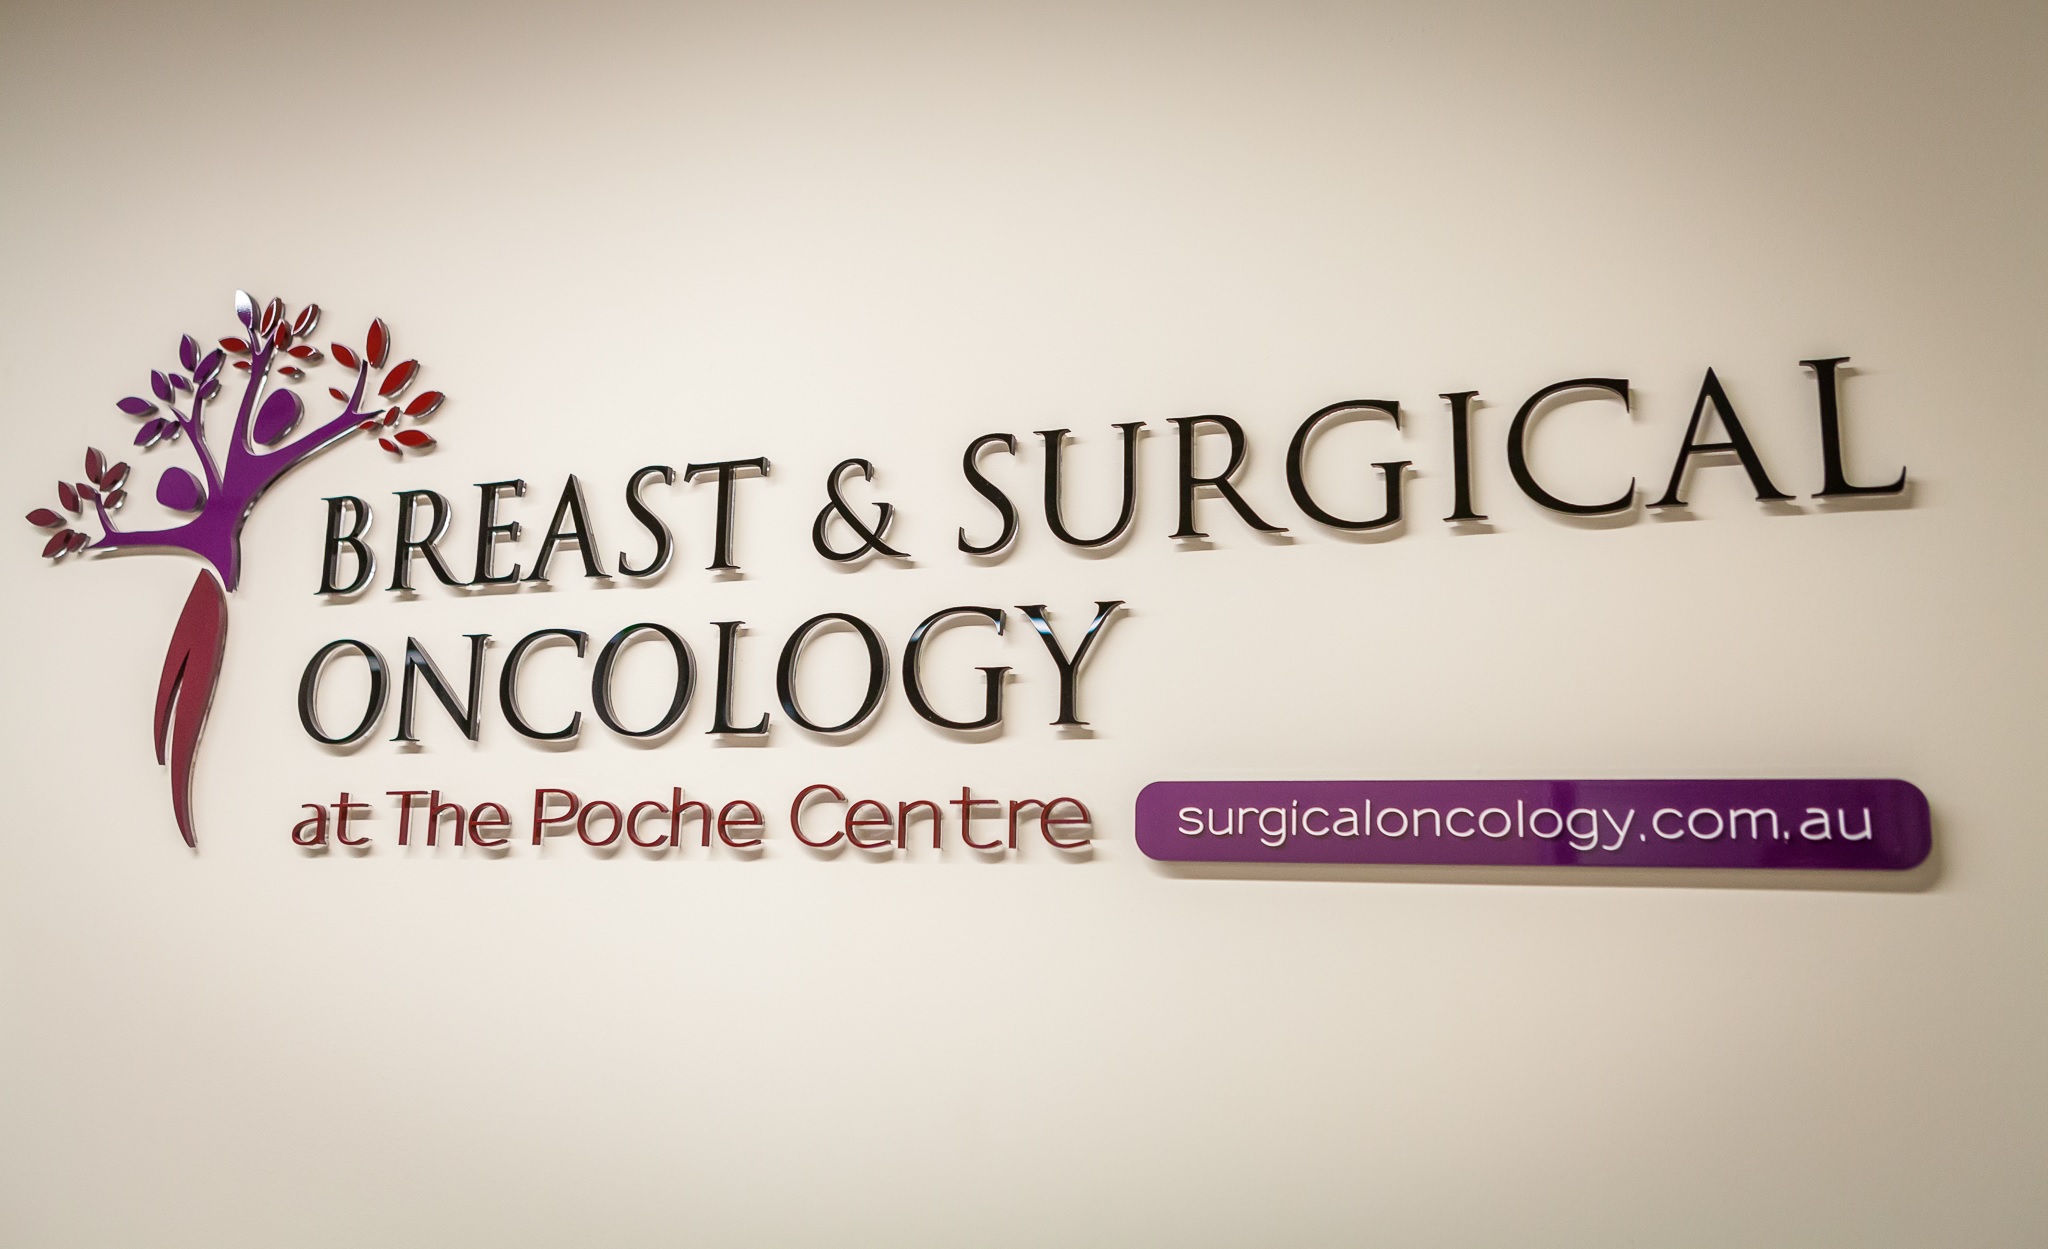 Breast and Surgical Oncology at The Poche Centre